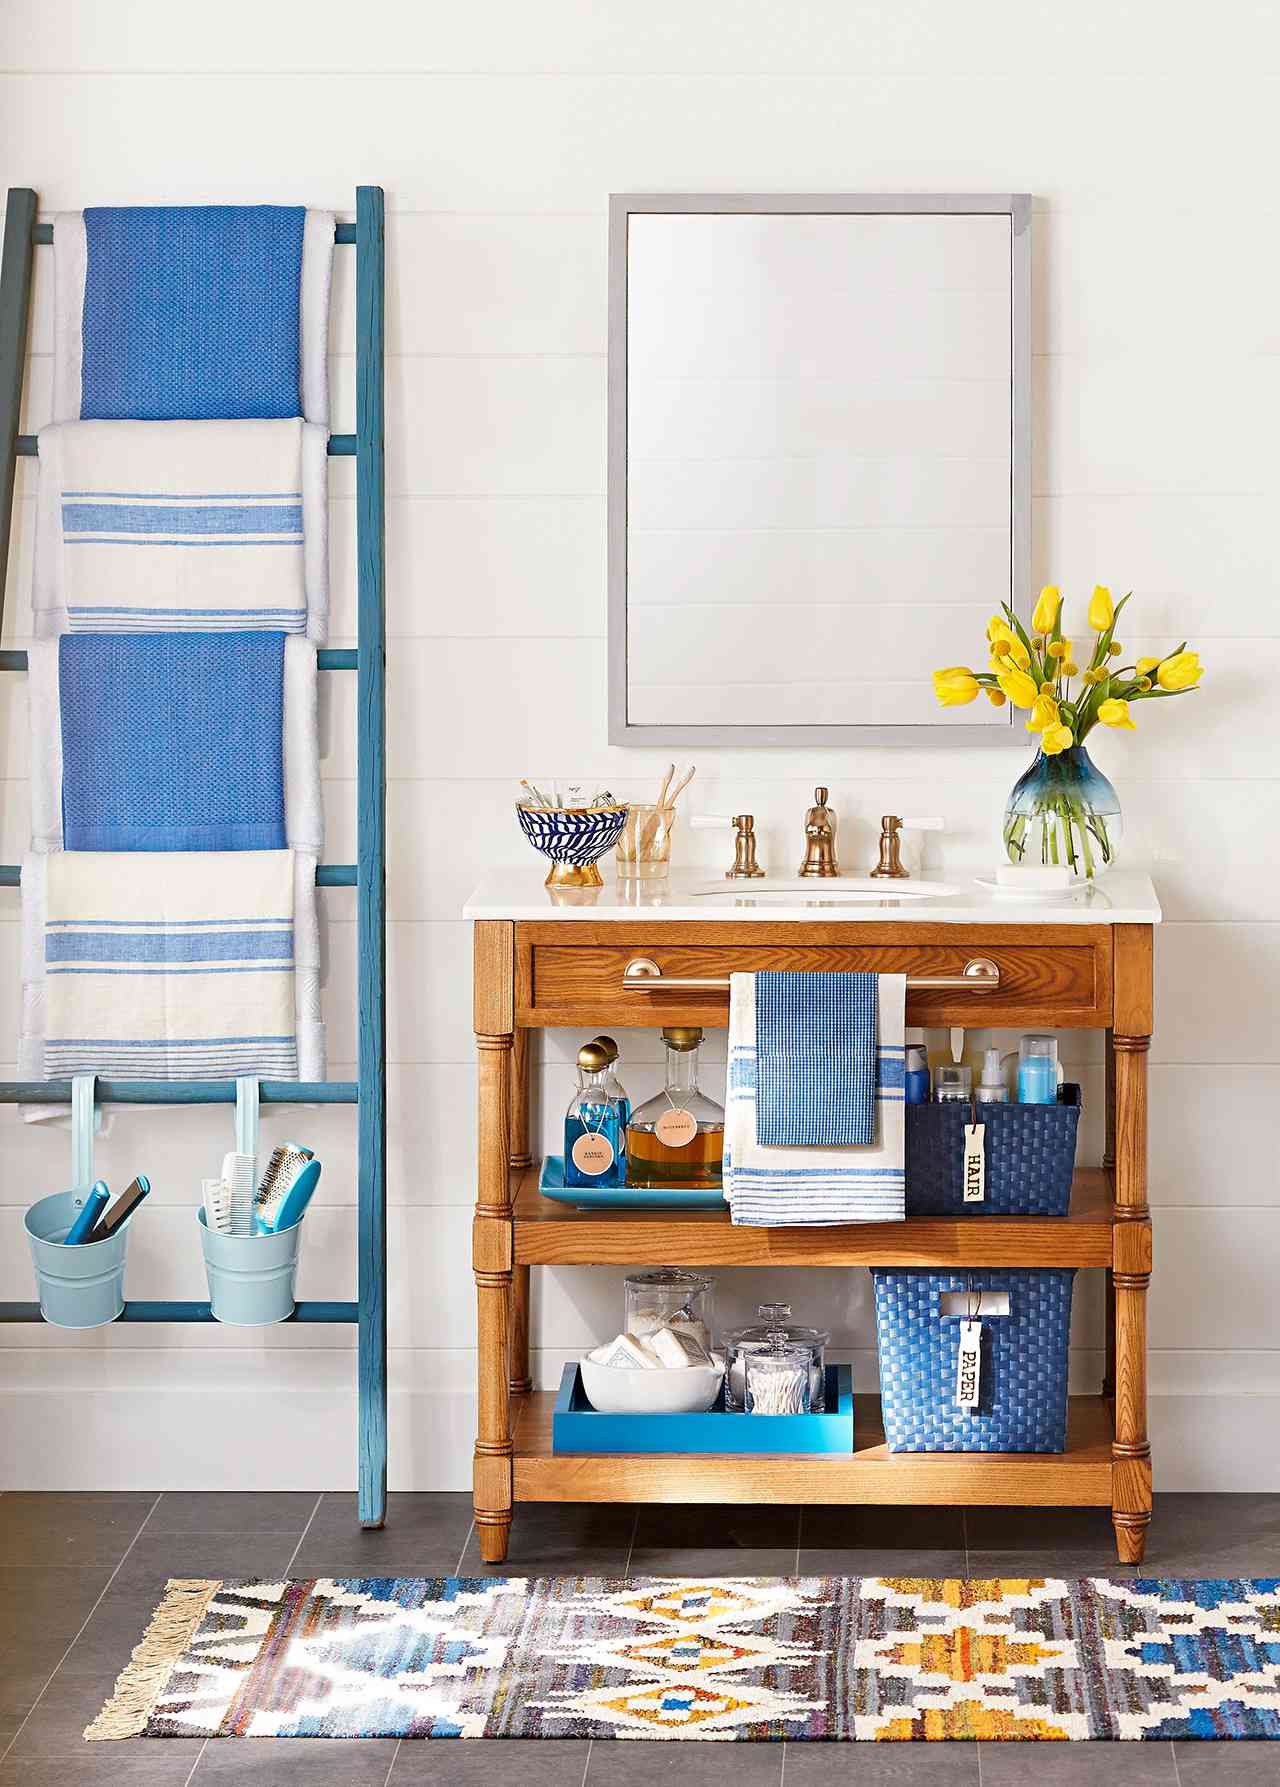 More In Your Bathroom, Bathroom Shelf Ideas For Towels